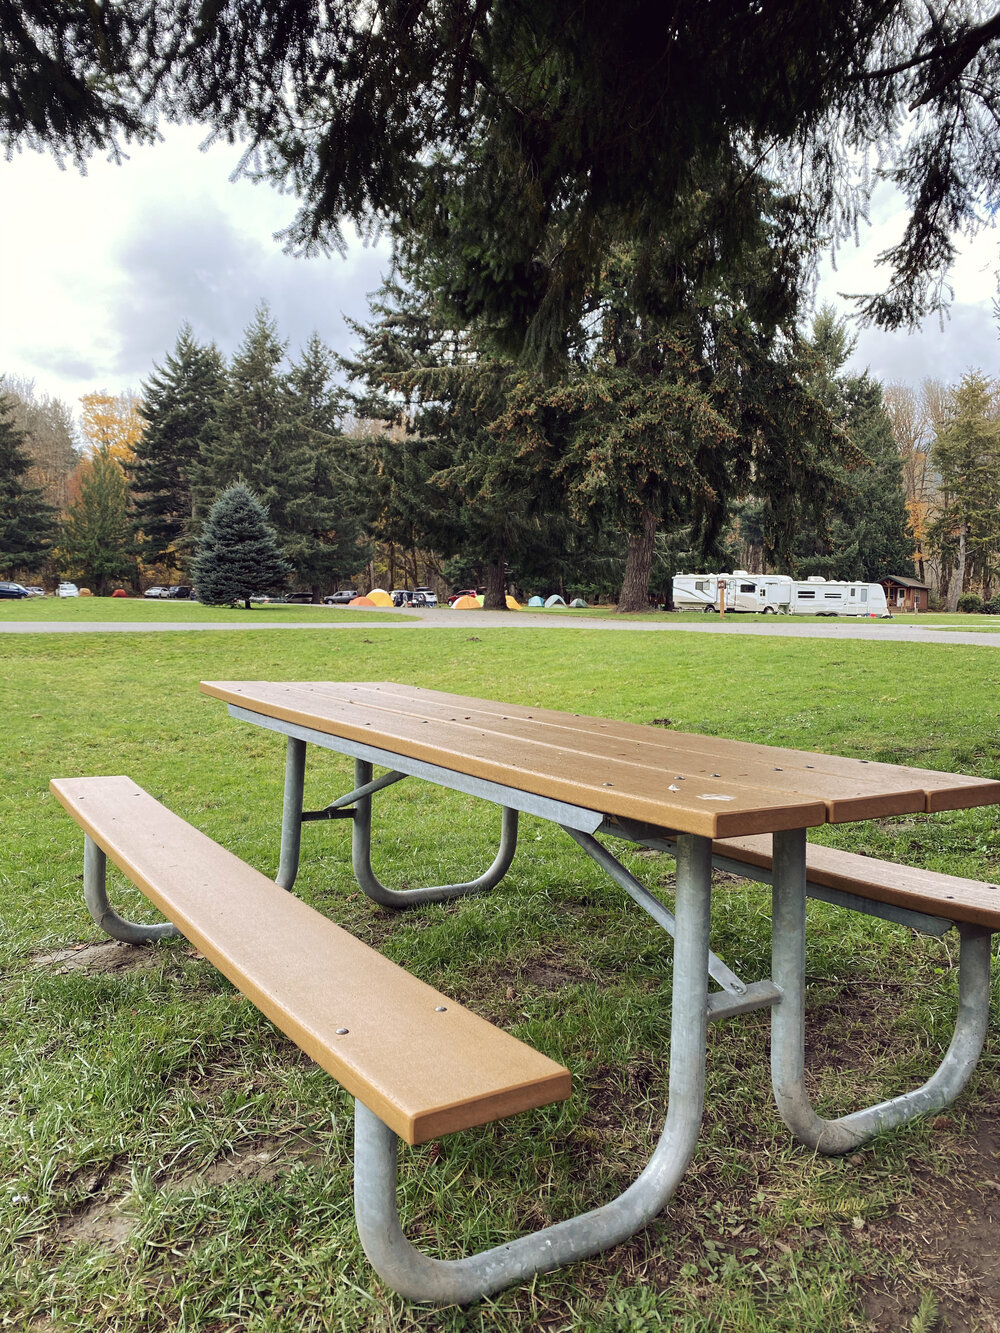 Picnic tables at Dosewallips campground